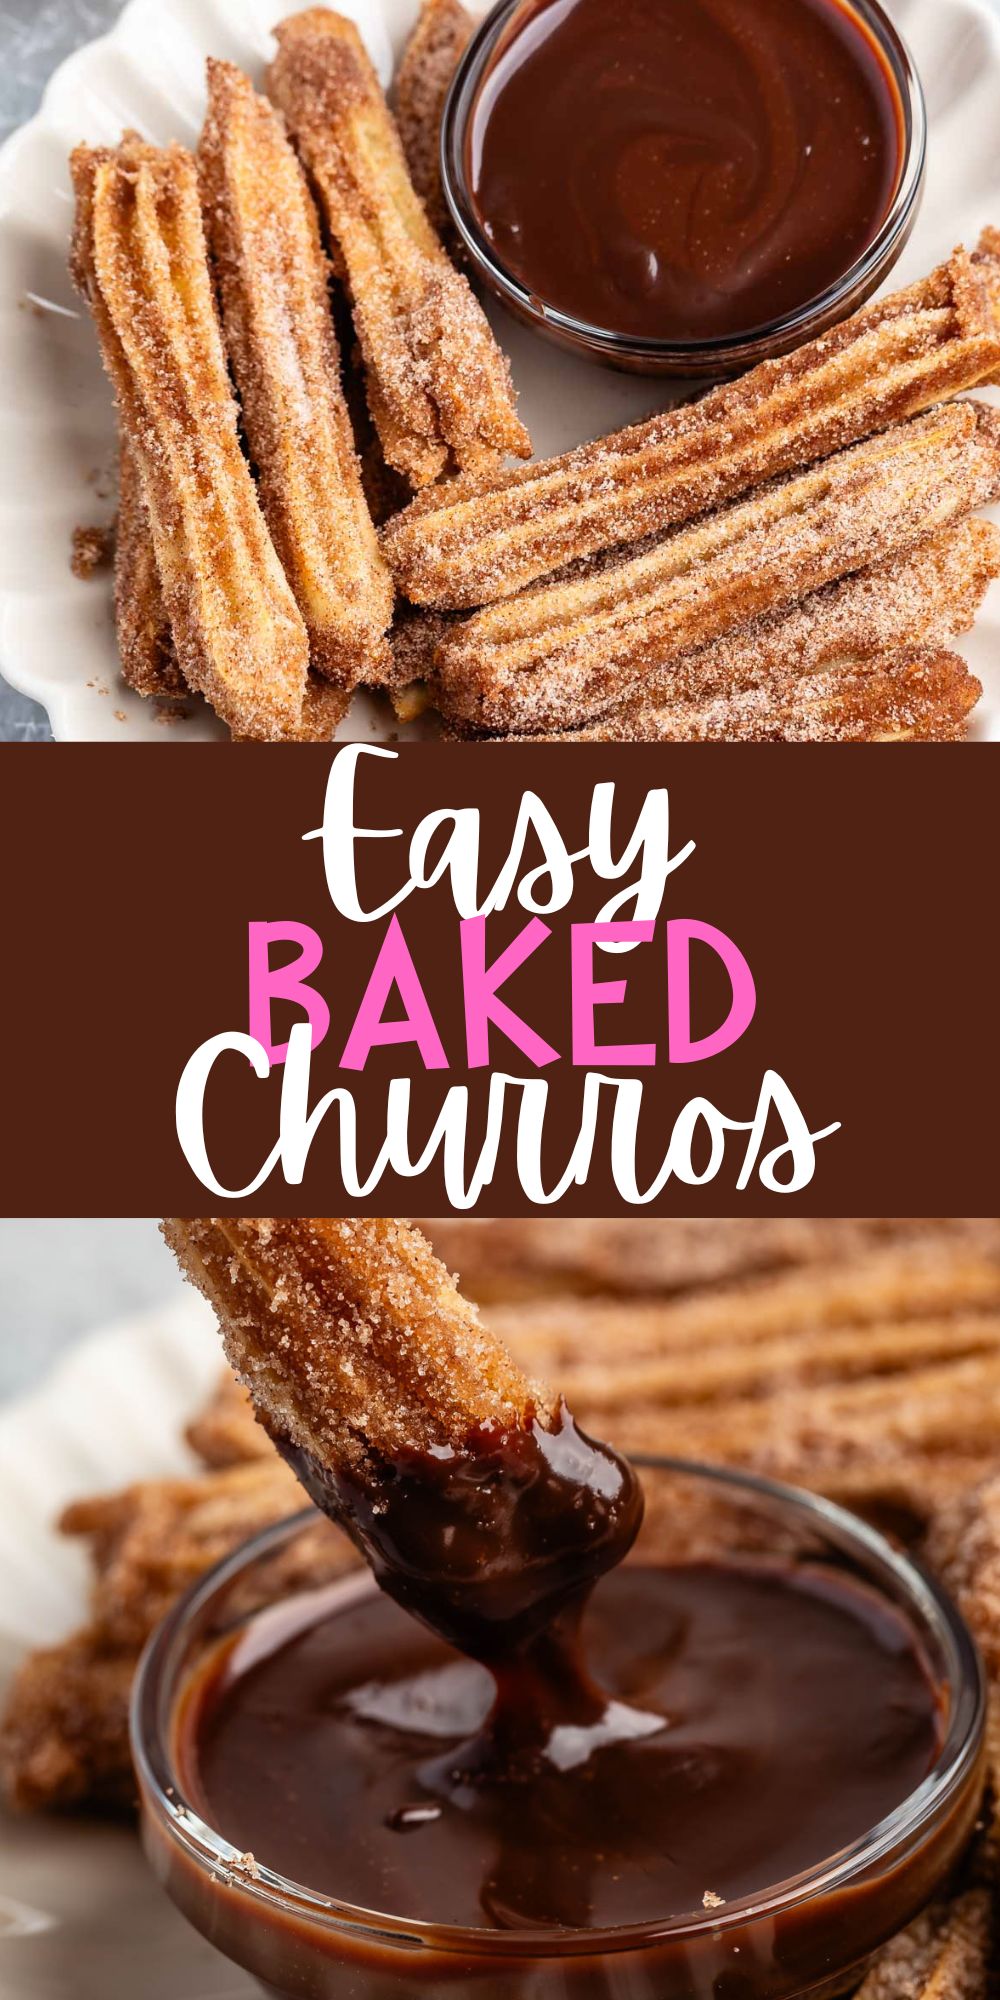 two photos of churros covered in cinnamon sugar next to a bowl of chocolate with words on the image.